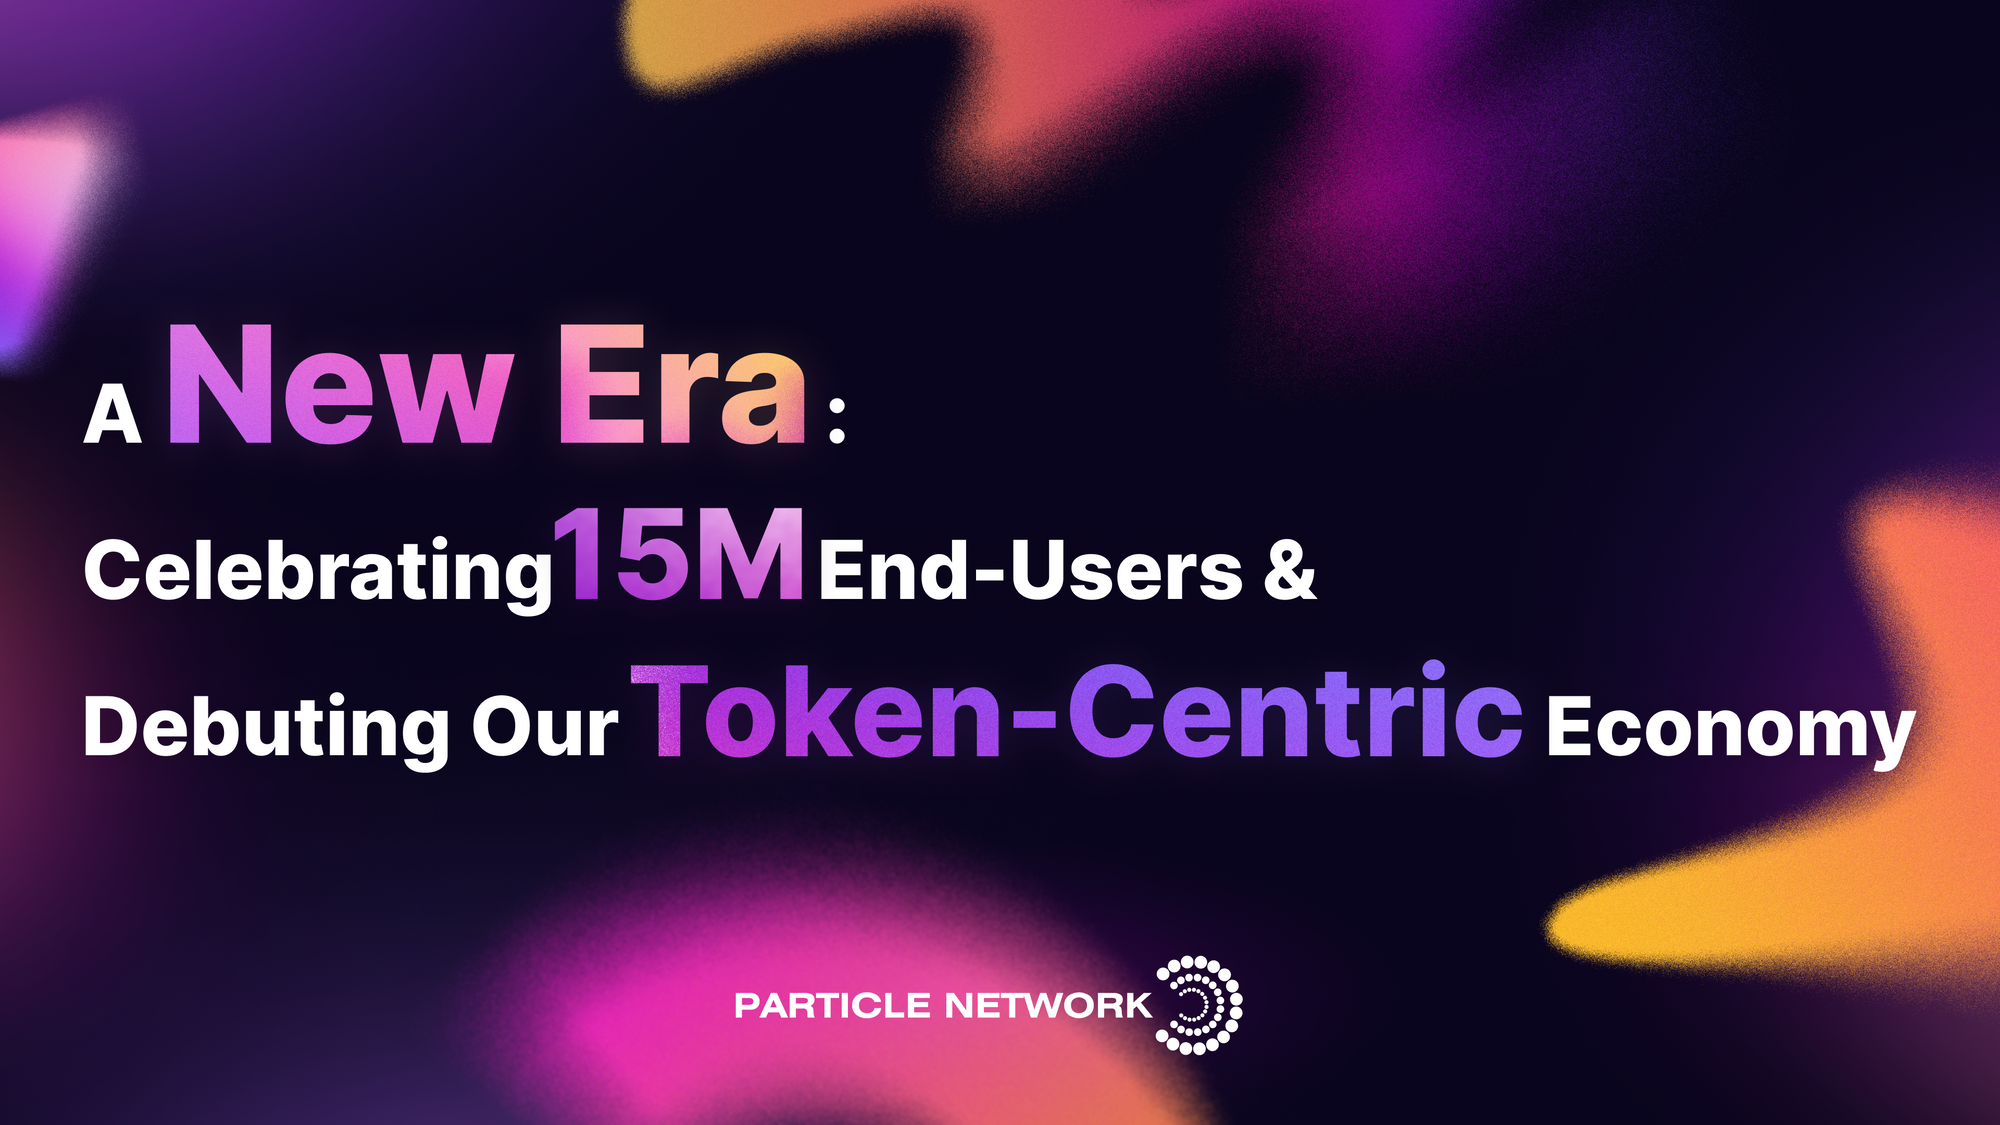 A New Era: Celebrating 15M End-Users & Debuting Our Token-Centric Economy